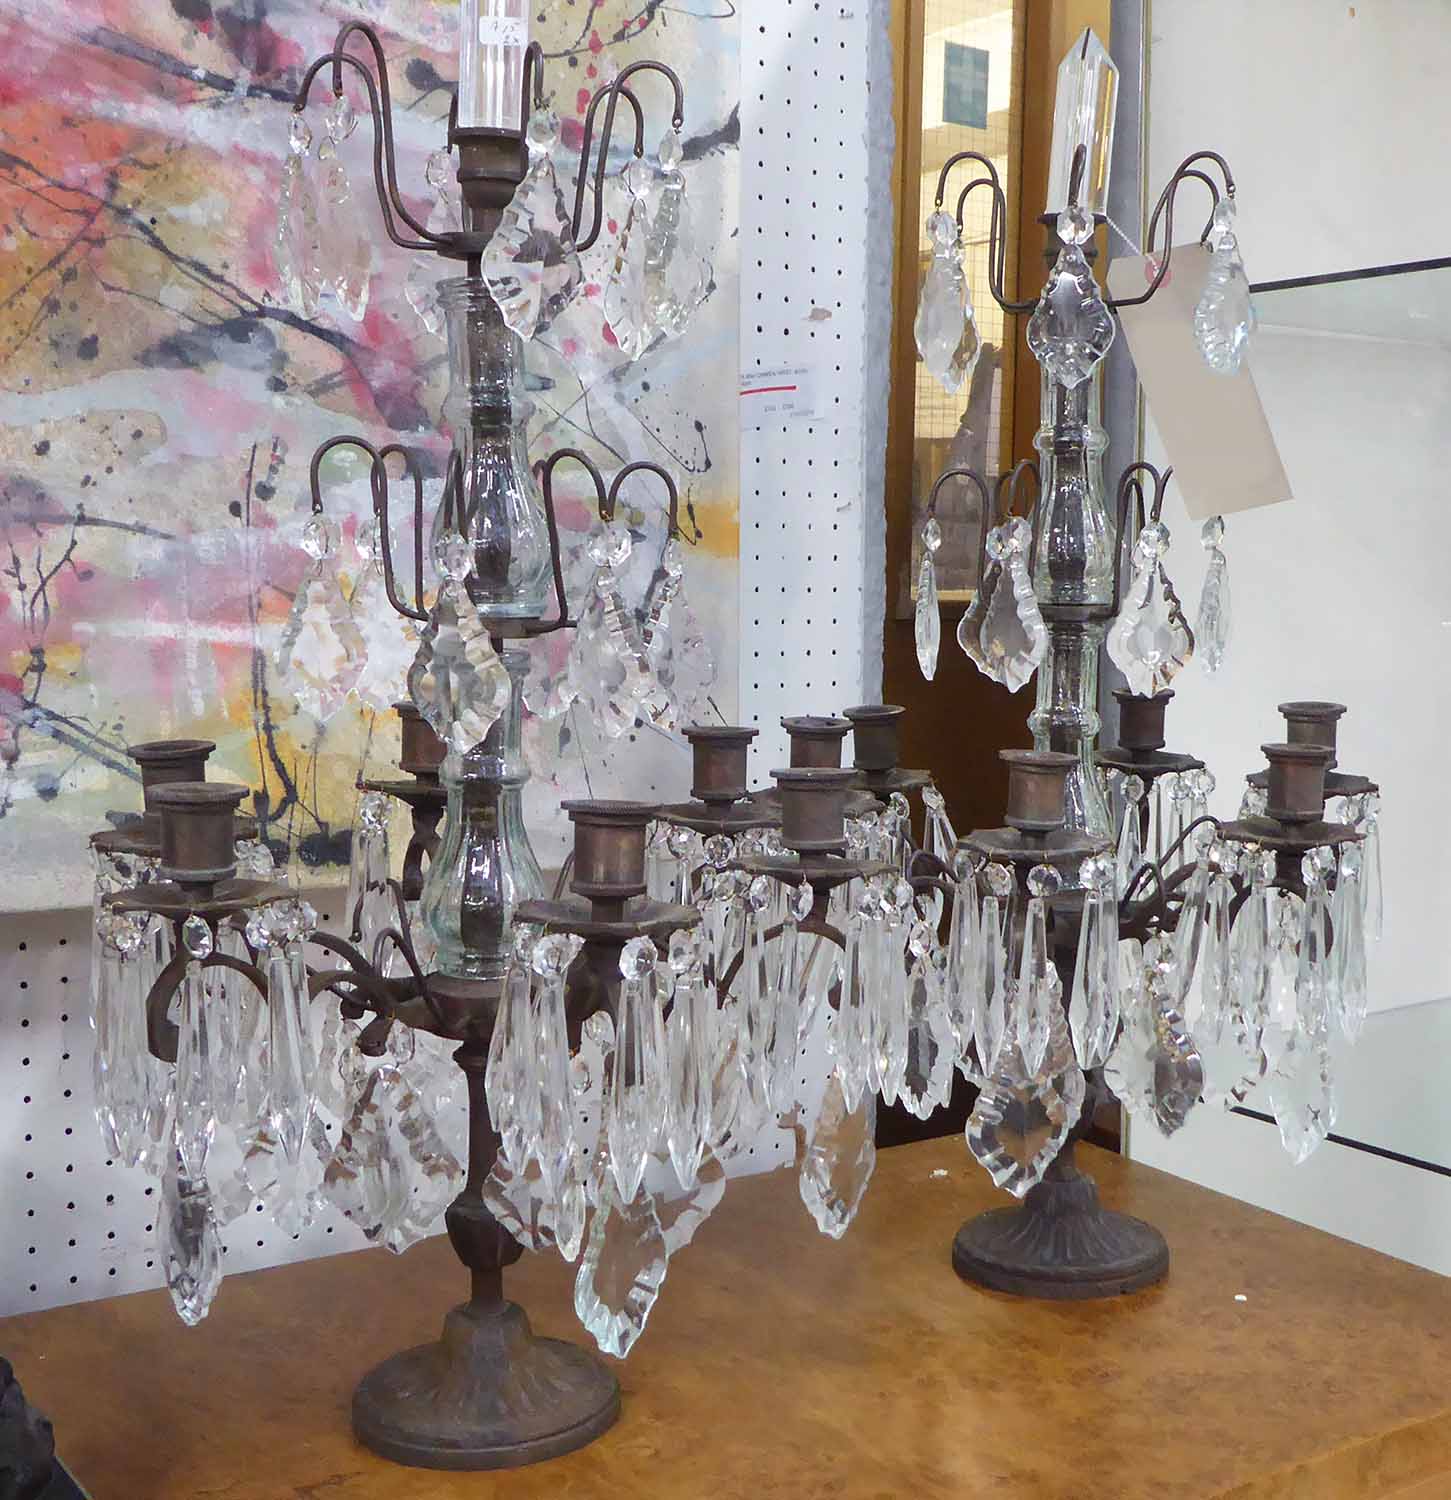 TABLE CANDELABRAS, a pair, six branch in rustic finish with glass drops, 60cm H.